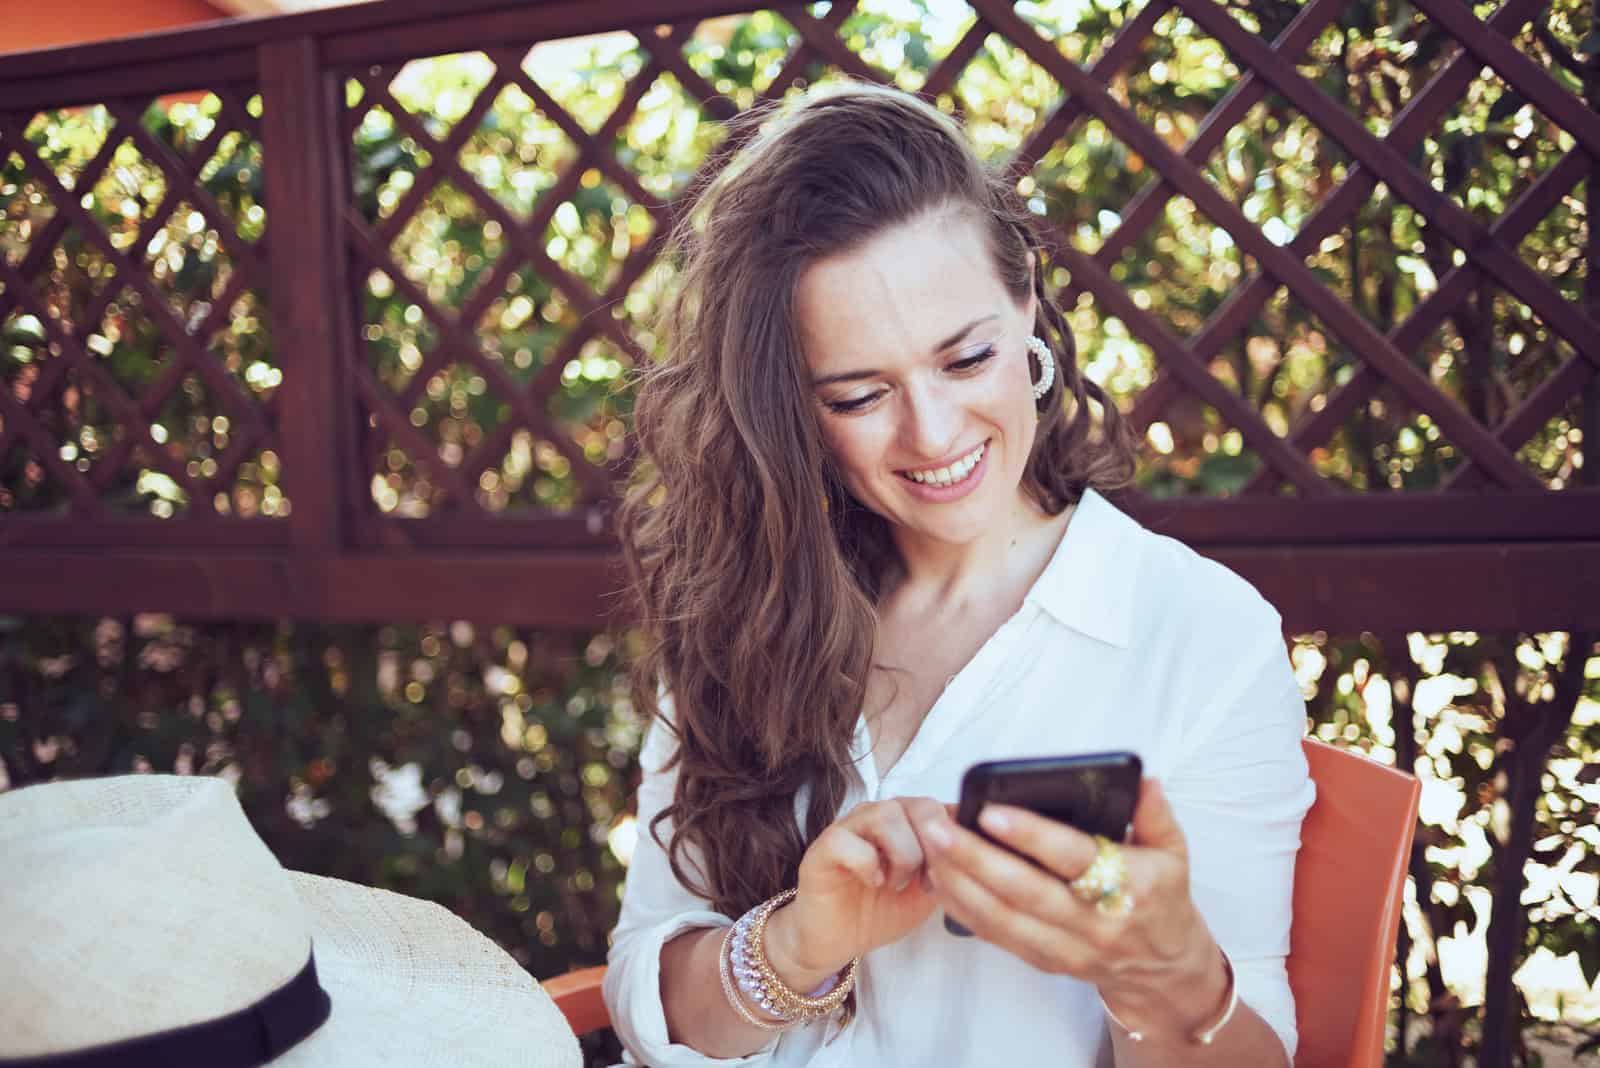 a smiling woman with long brown hair sits at a table and keys on the phone